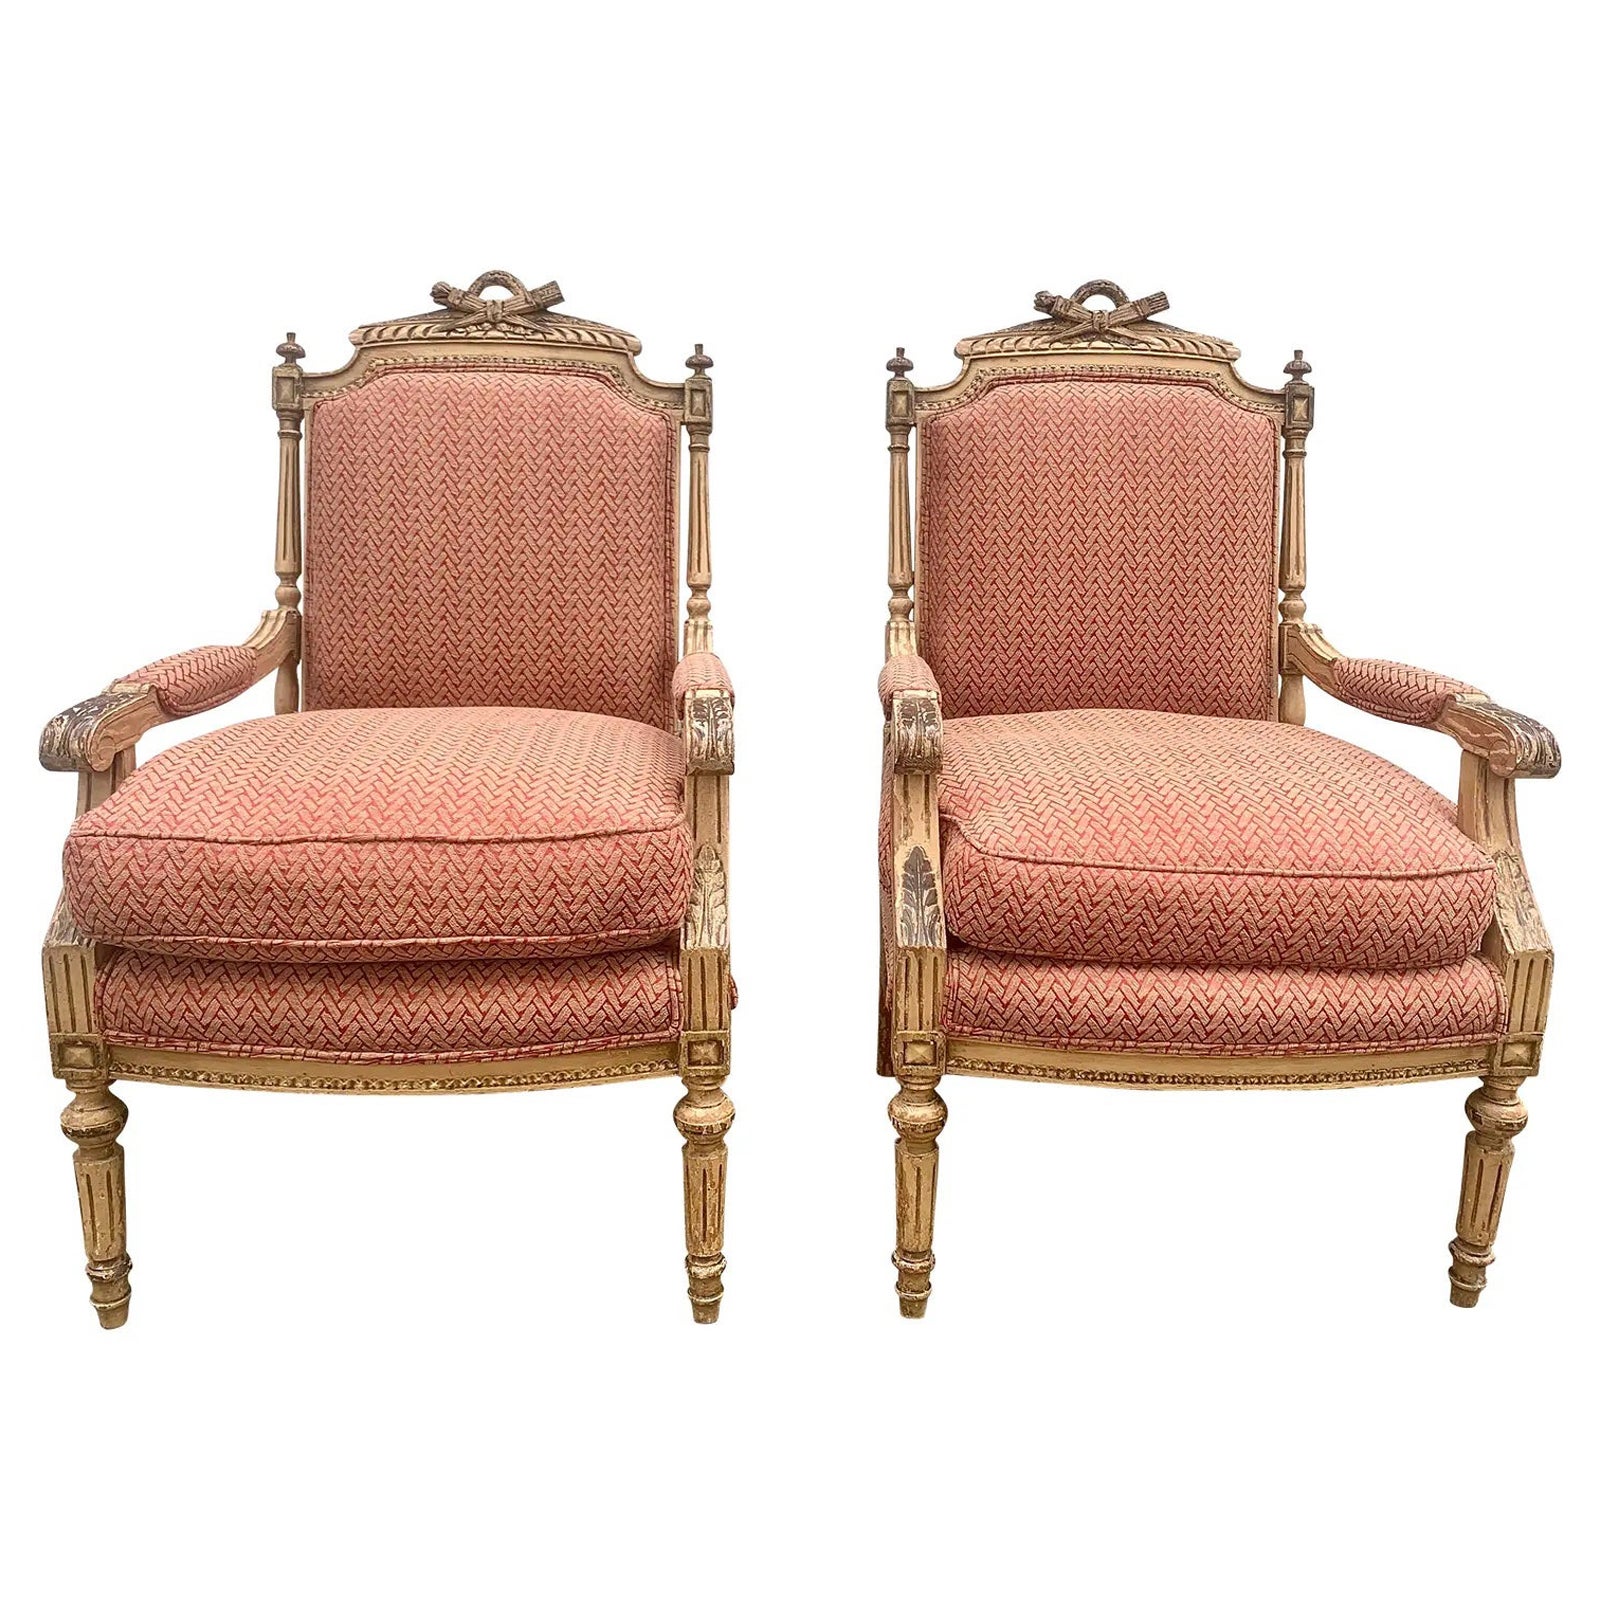 Antique French Provincial Louis XVI Armchairs, Pair For Sale